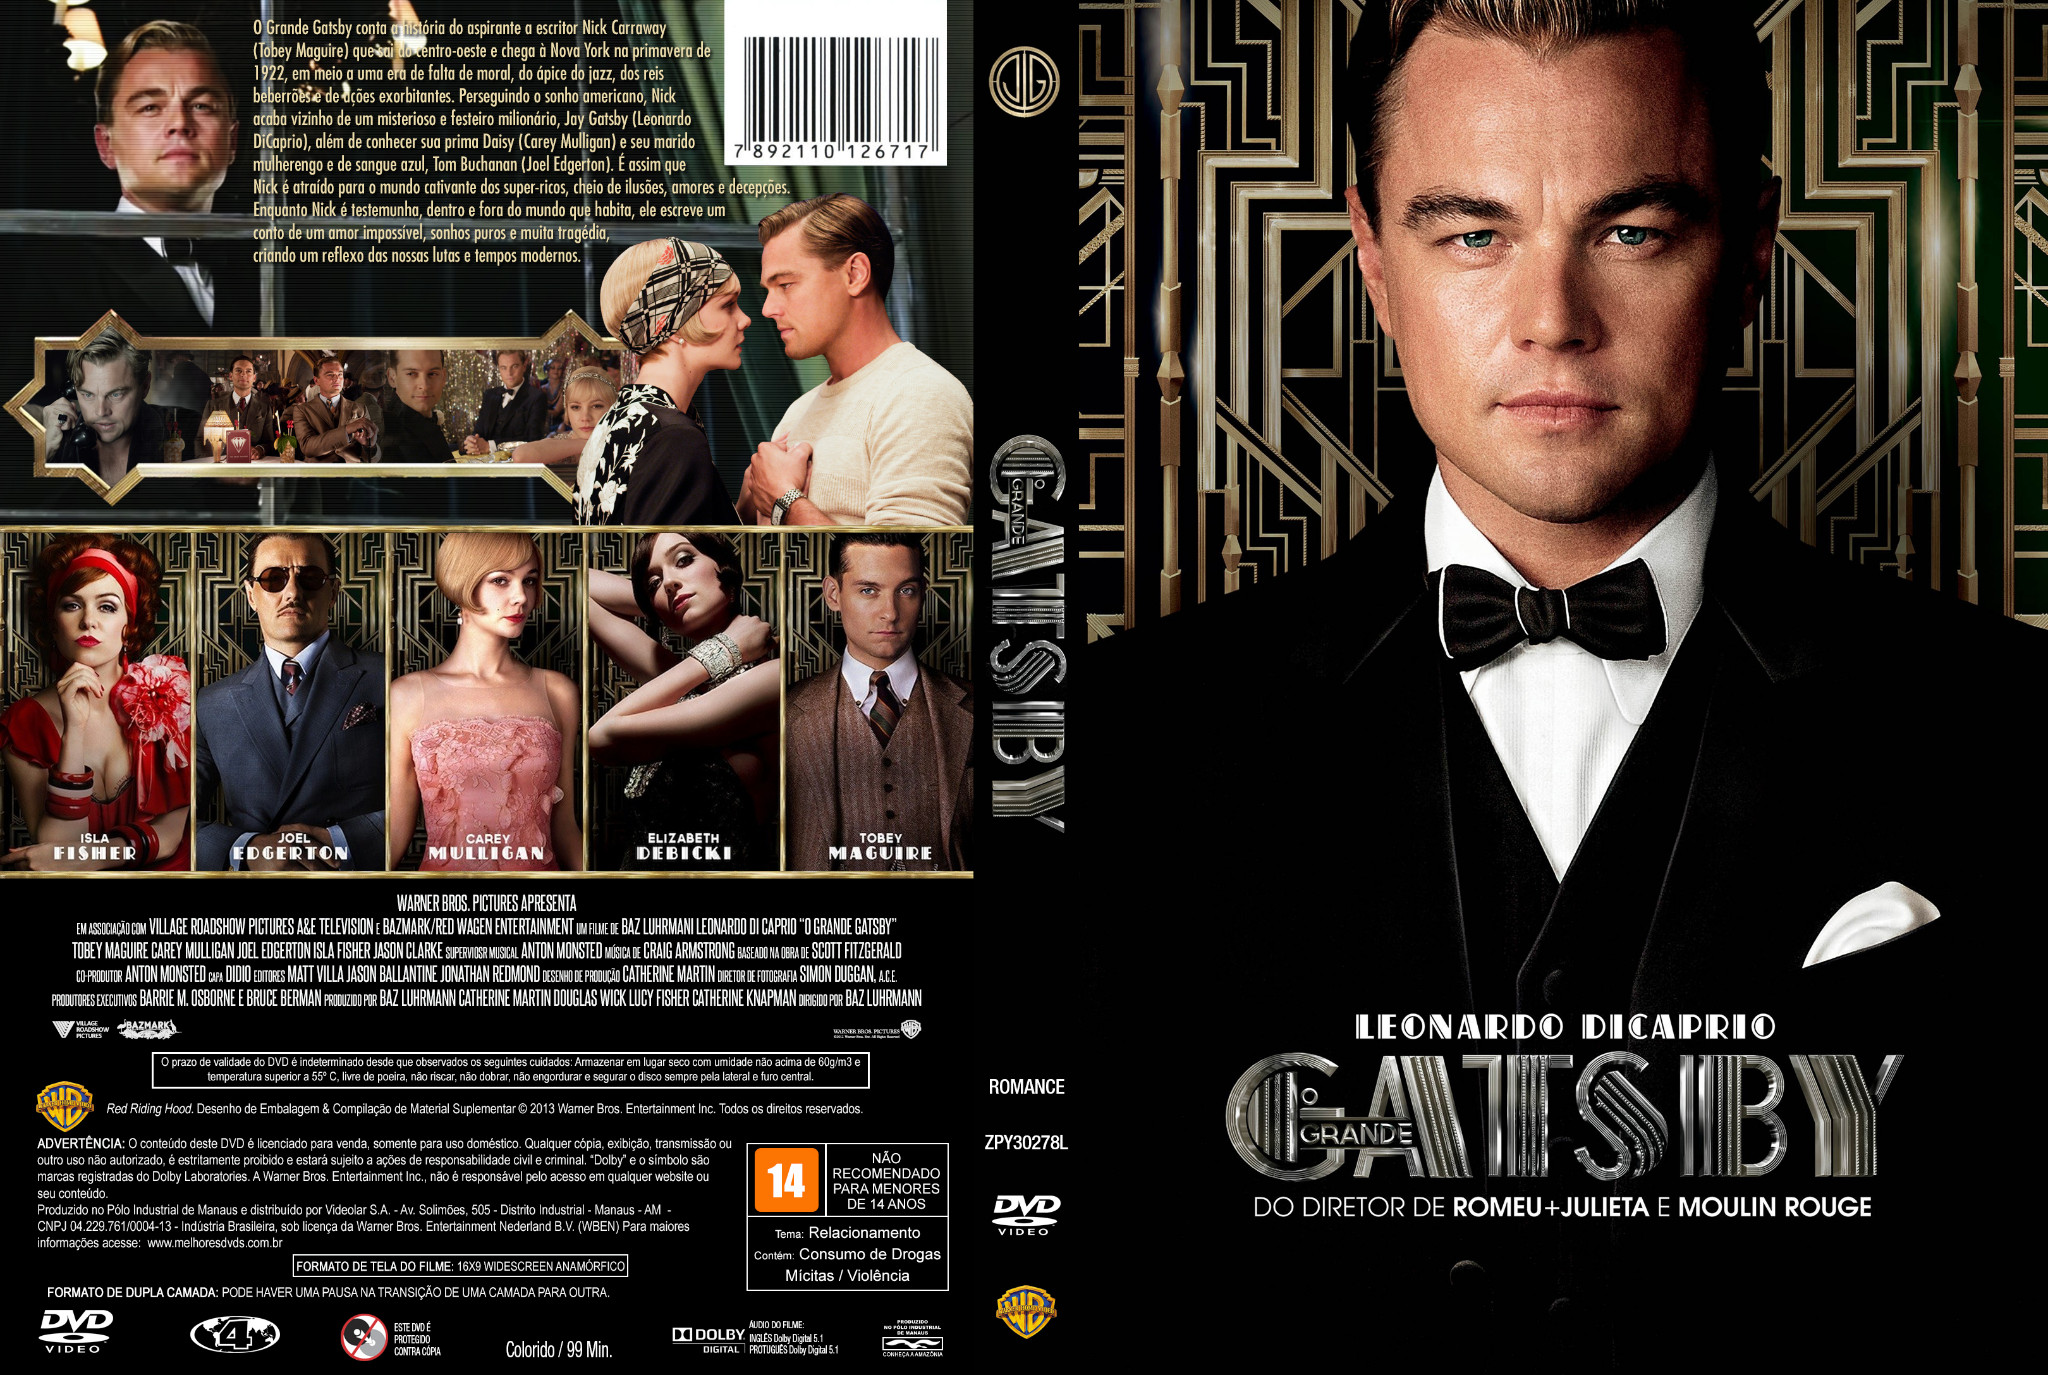 the great gatsby dvd label